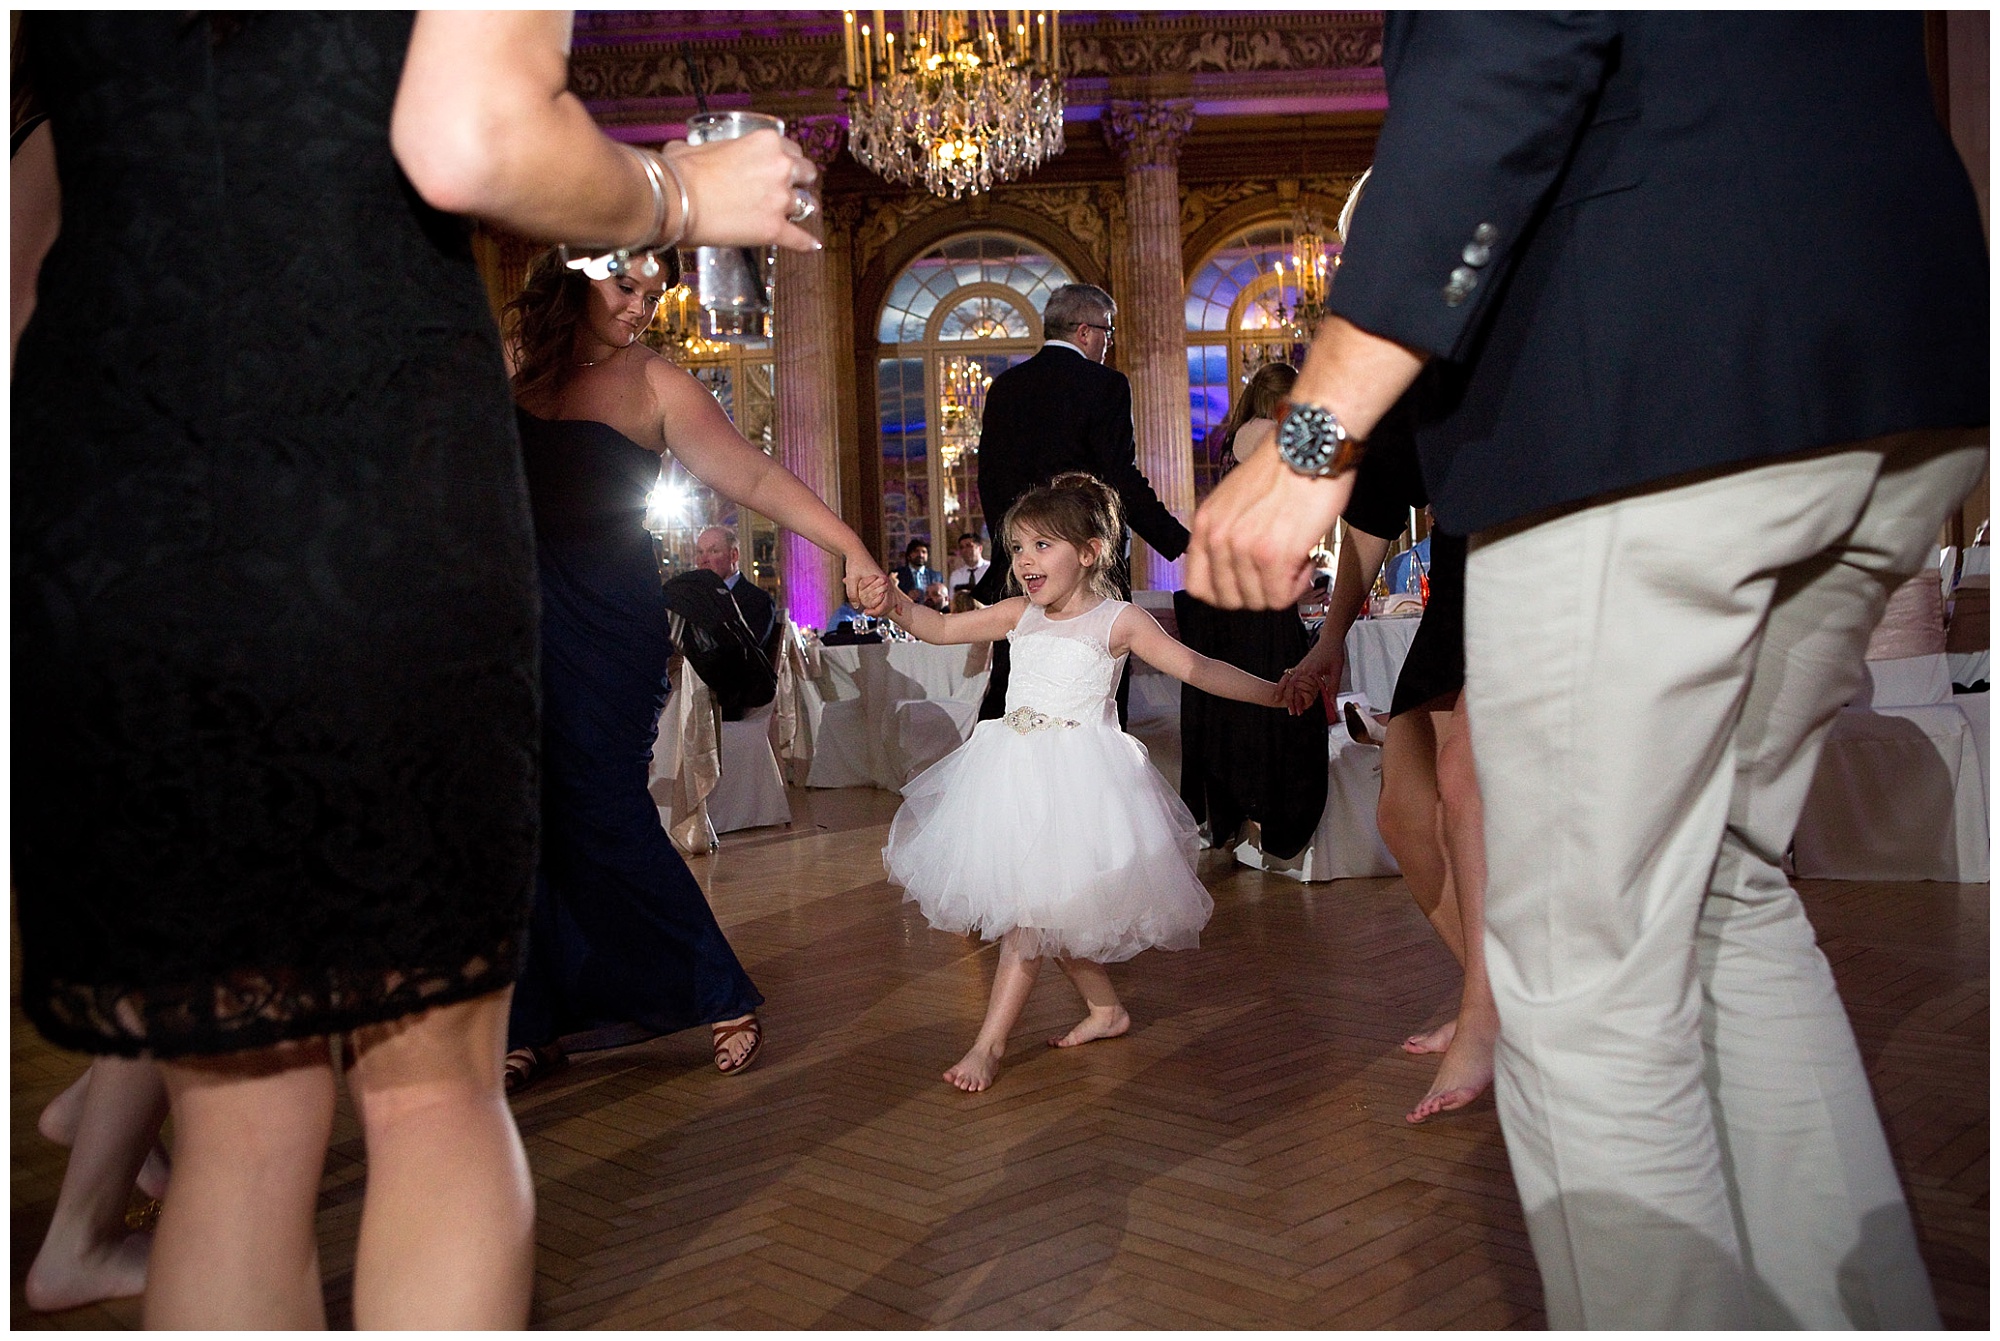 Photo of guests dancing hand ing hand